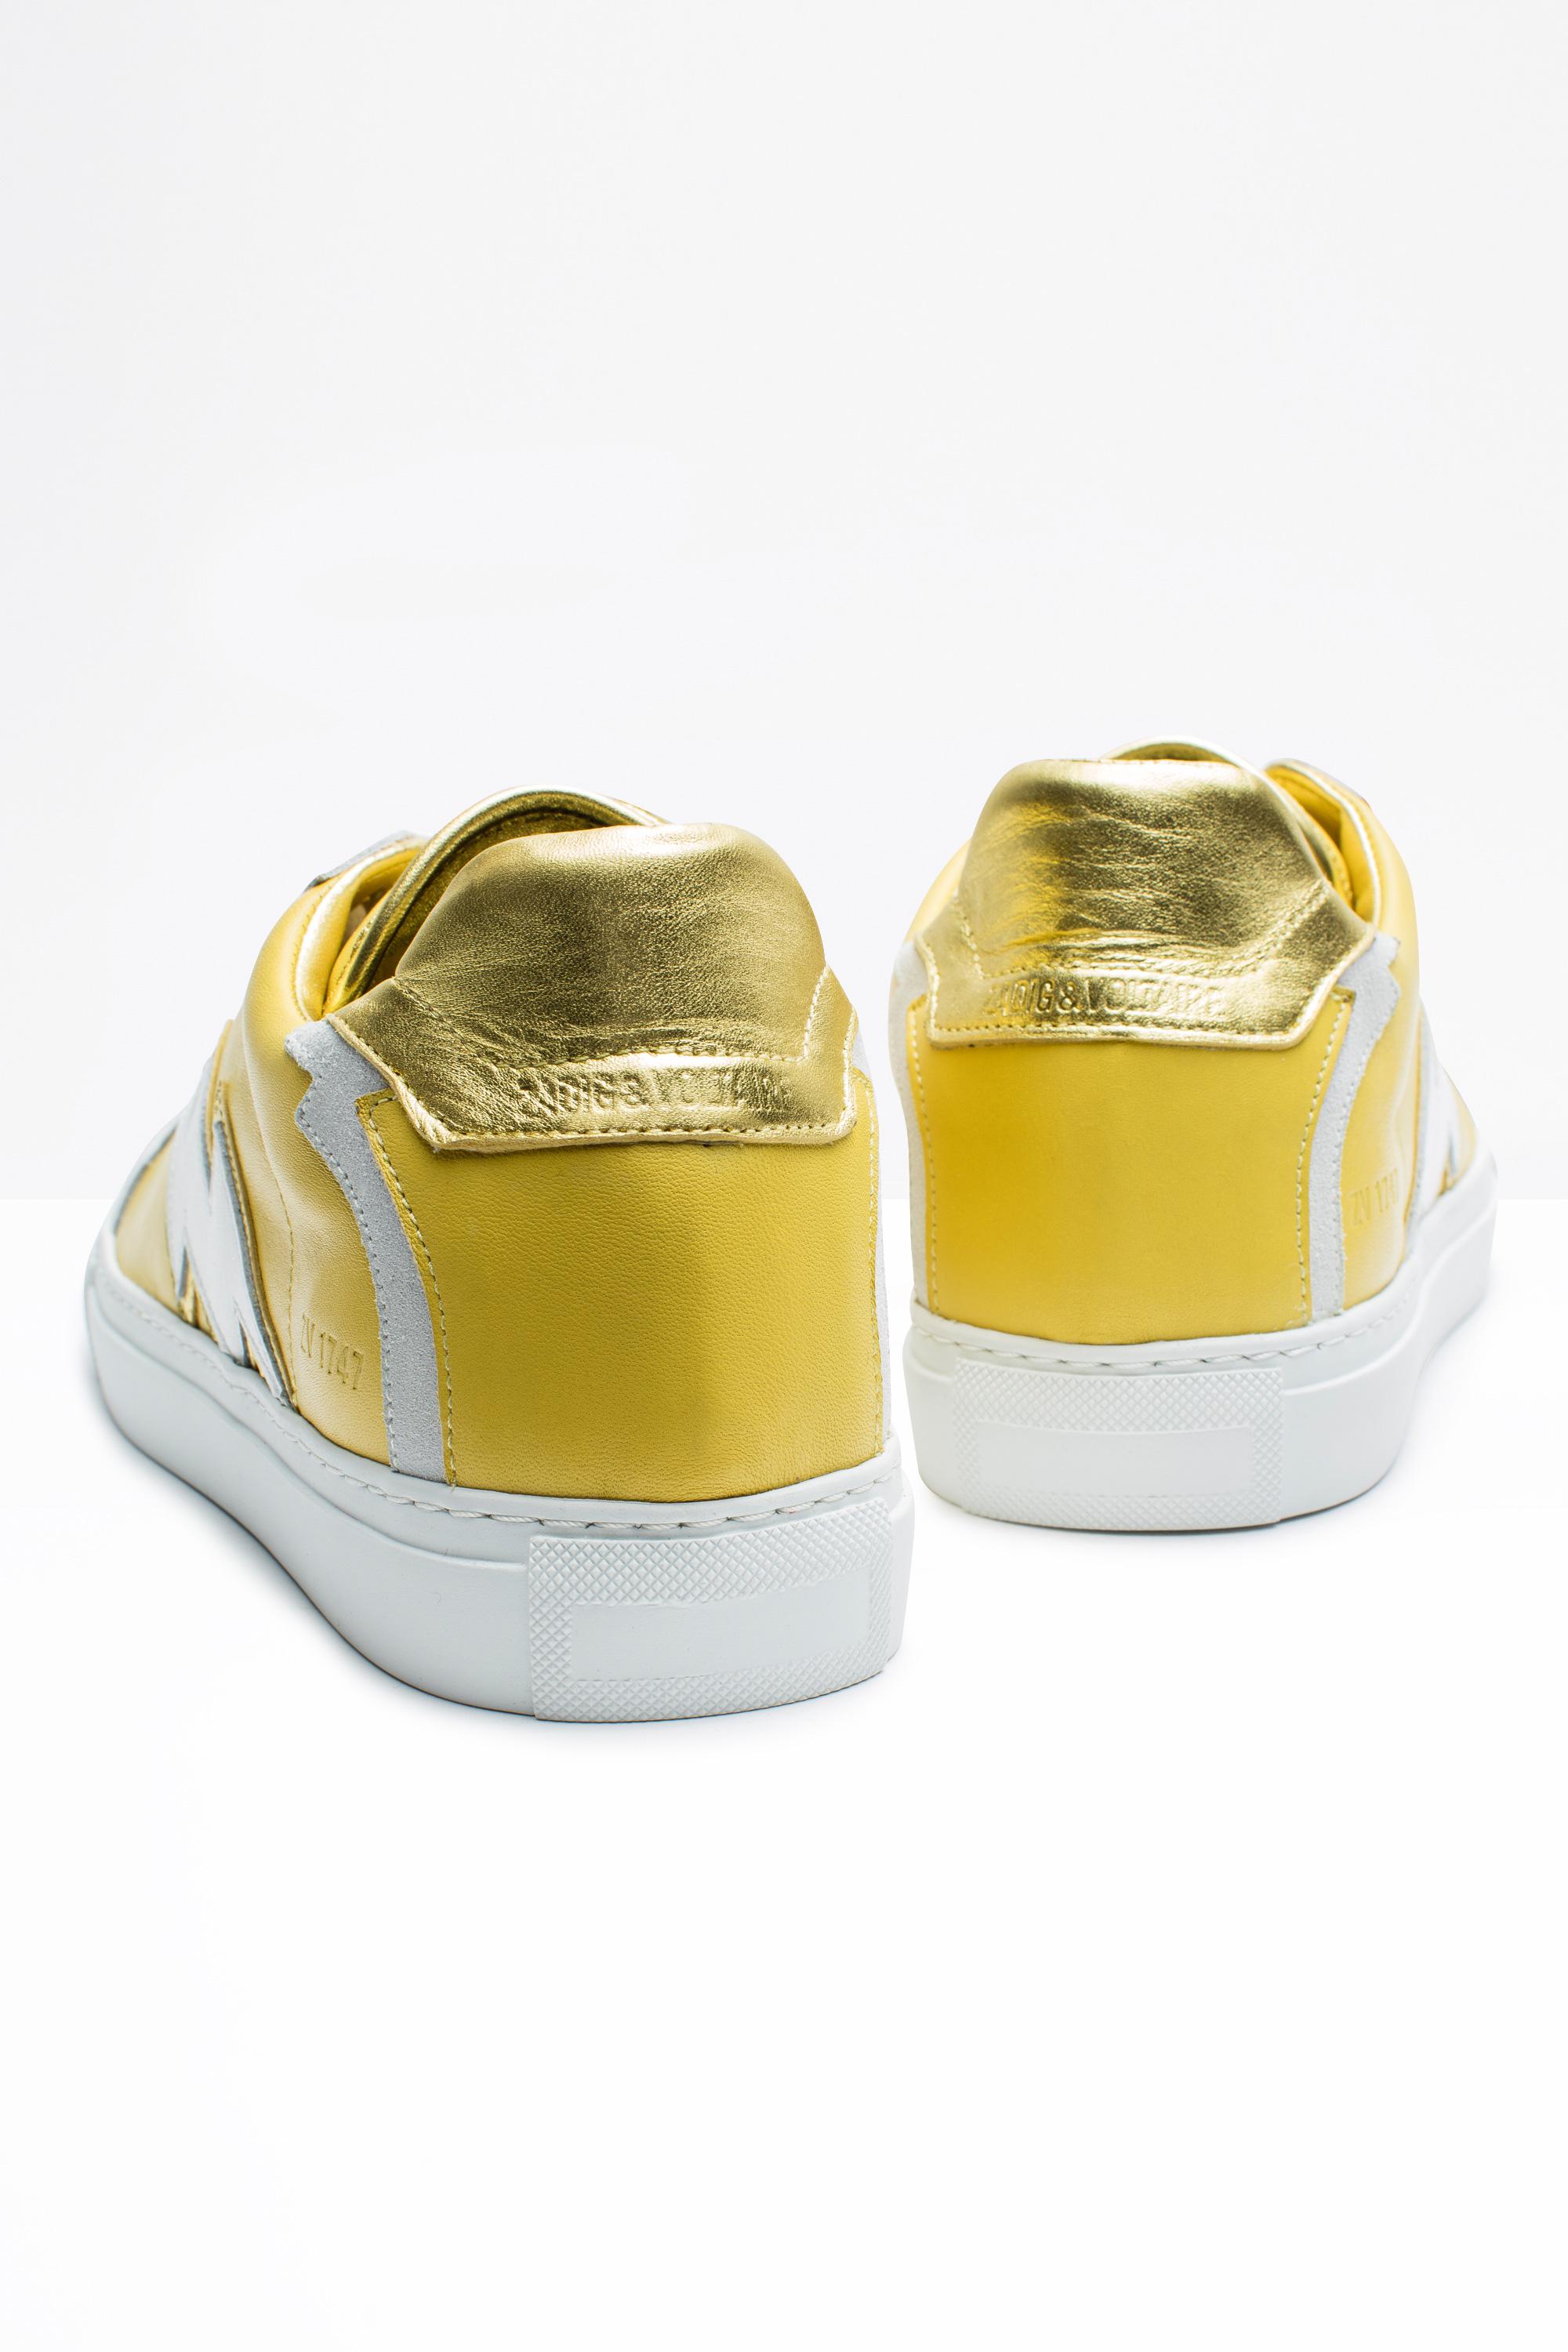 Lyst - Zadig & Voltaire Women's Zv1747 Flash Leather Sneakers in Yellow